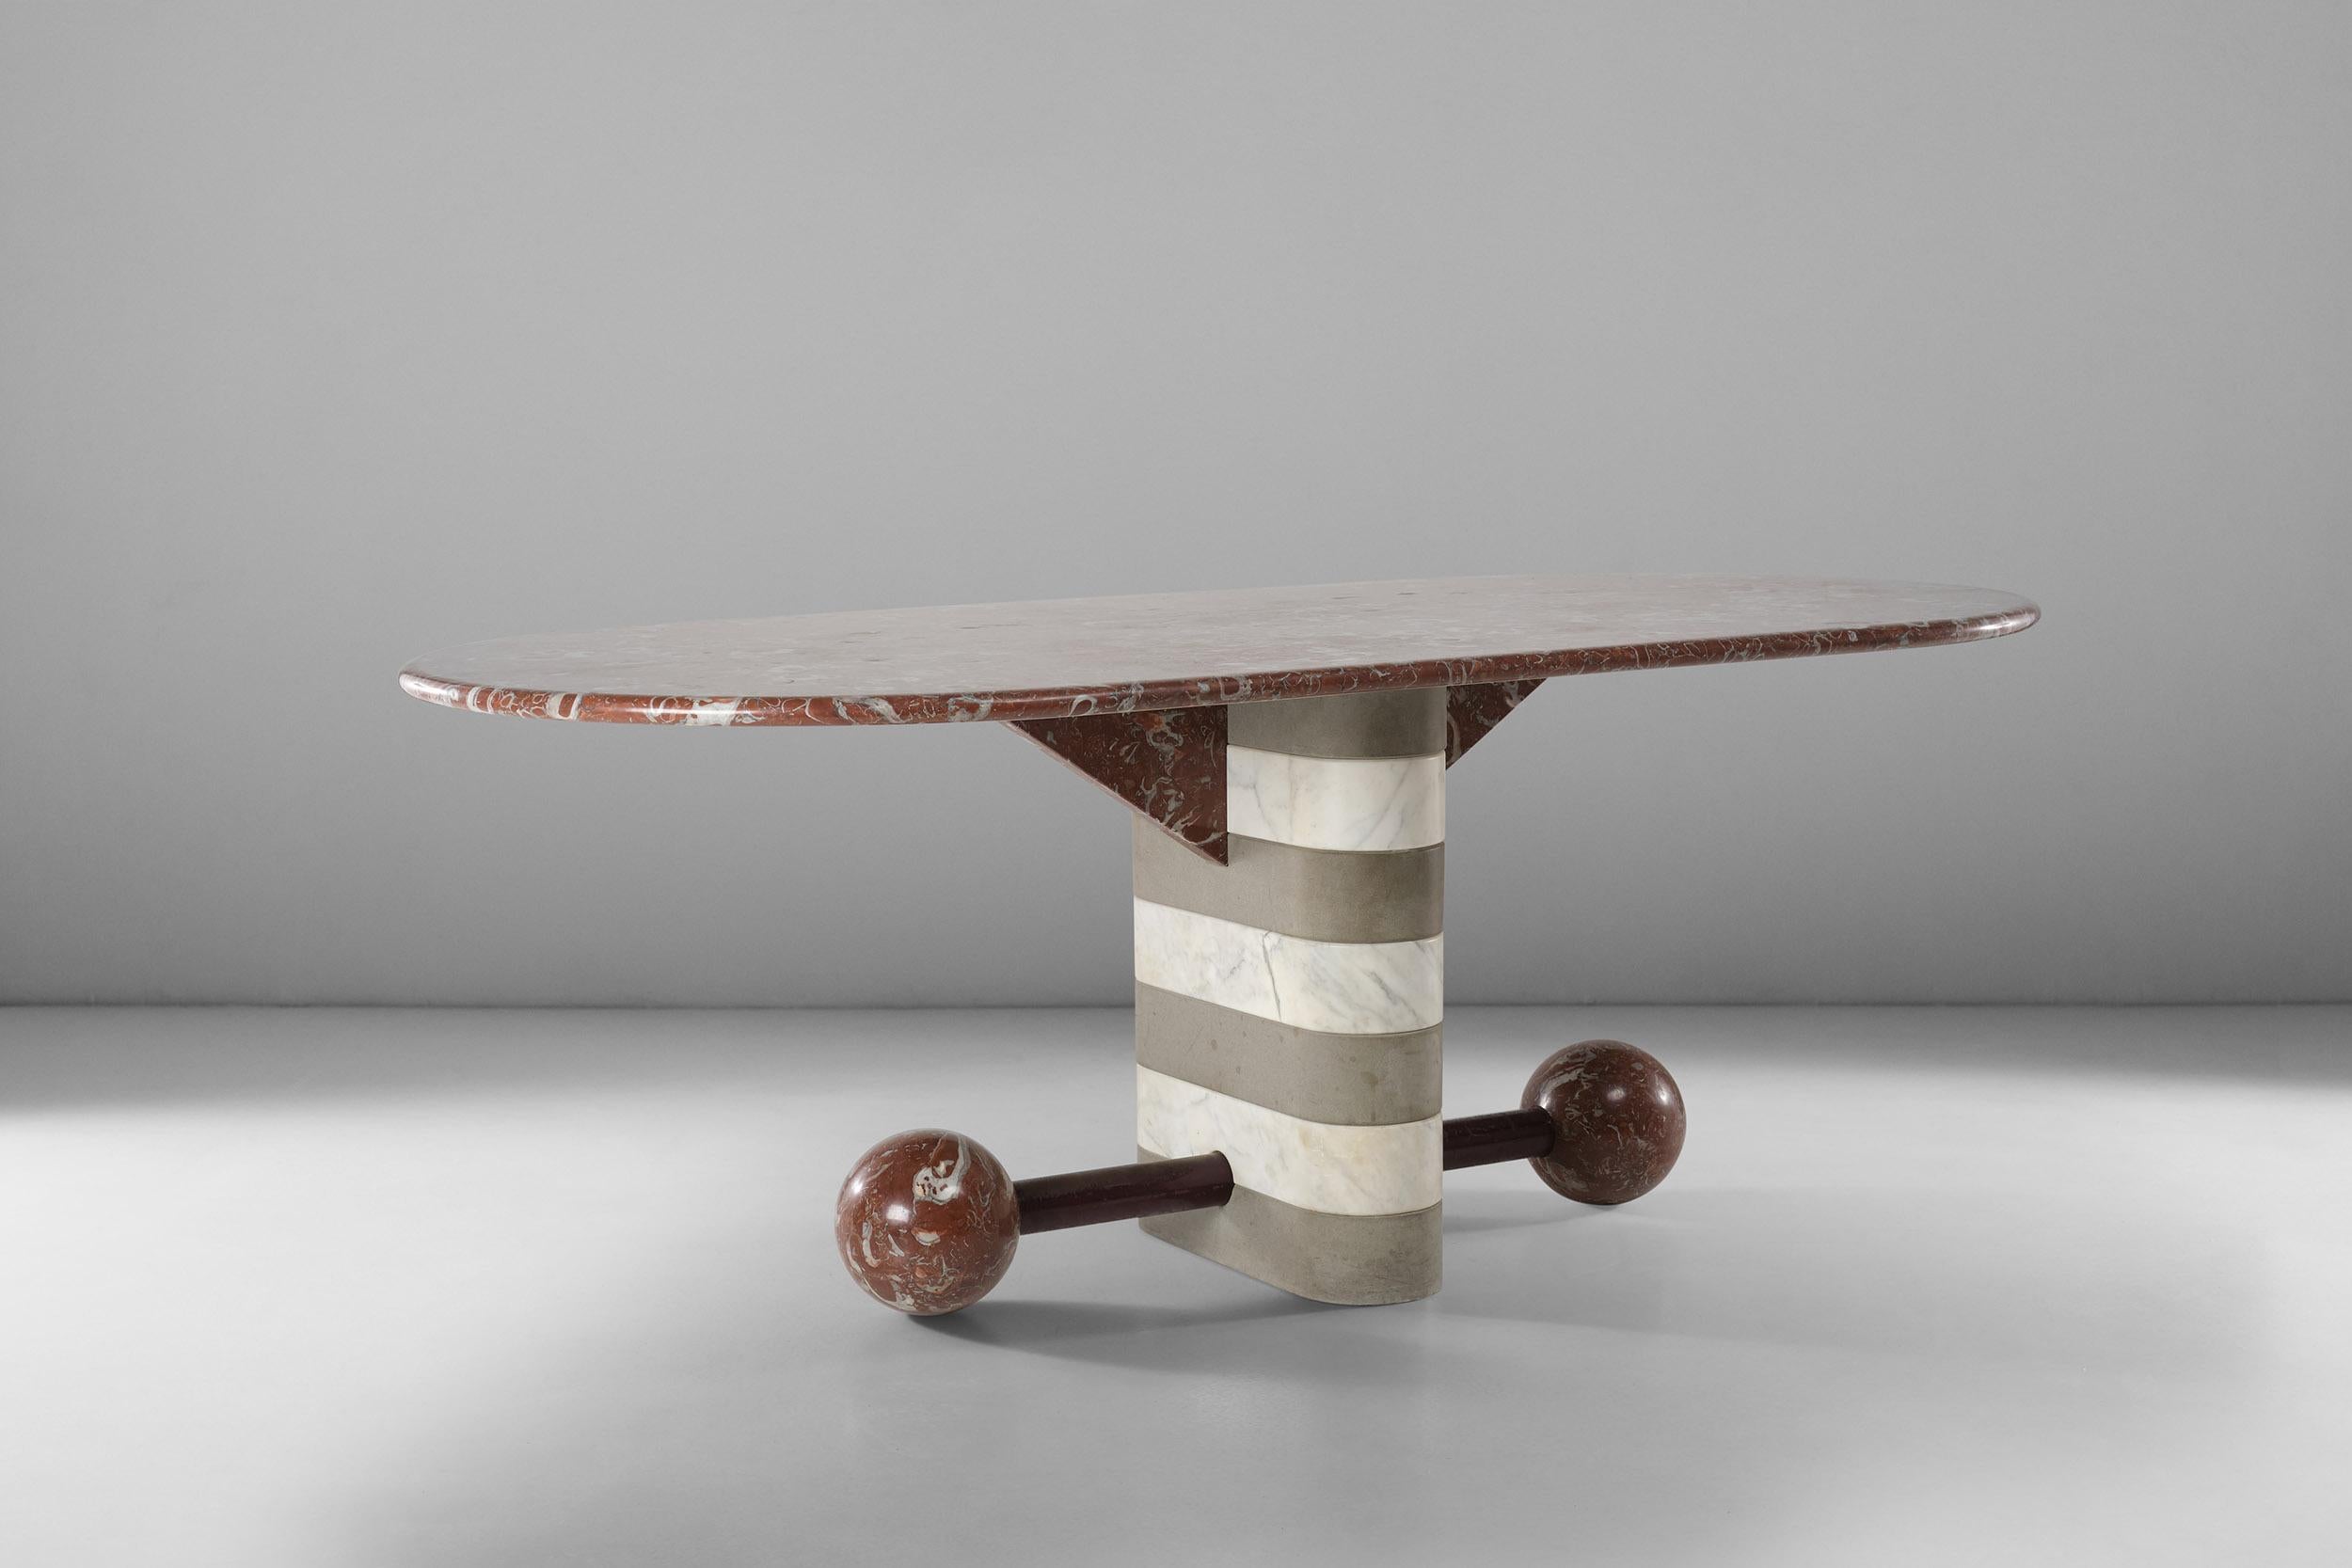 This wonderful table in marble and serena stone was designed by Michele de Lucchi in 1982 for Memphis. Iconic and truly unique in its shapes, this is a exceptional example of postmodern design. Its rounded single leg in a striped pattern of white